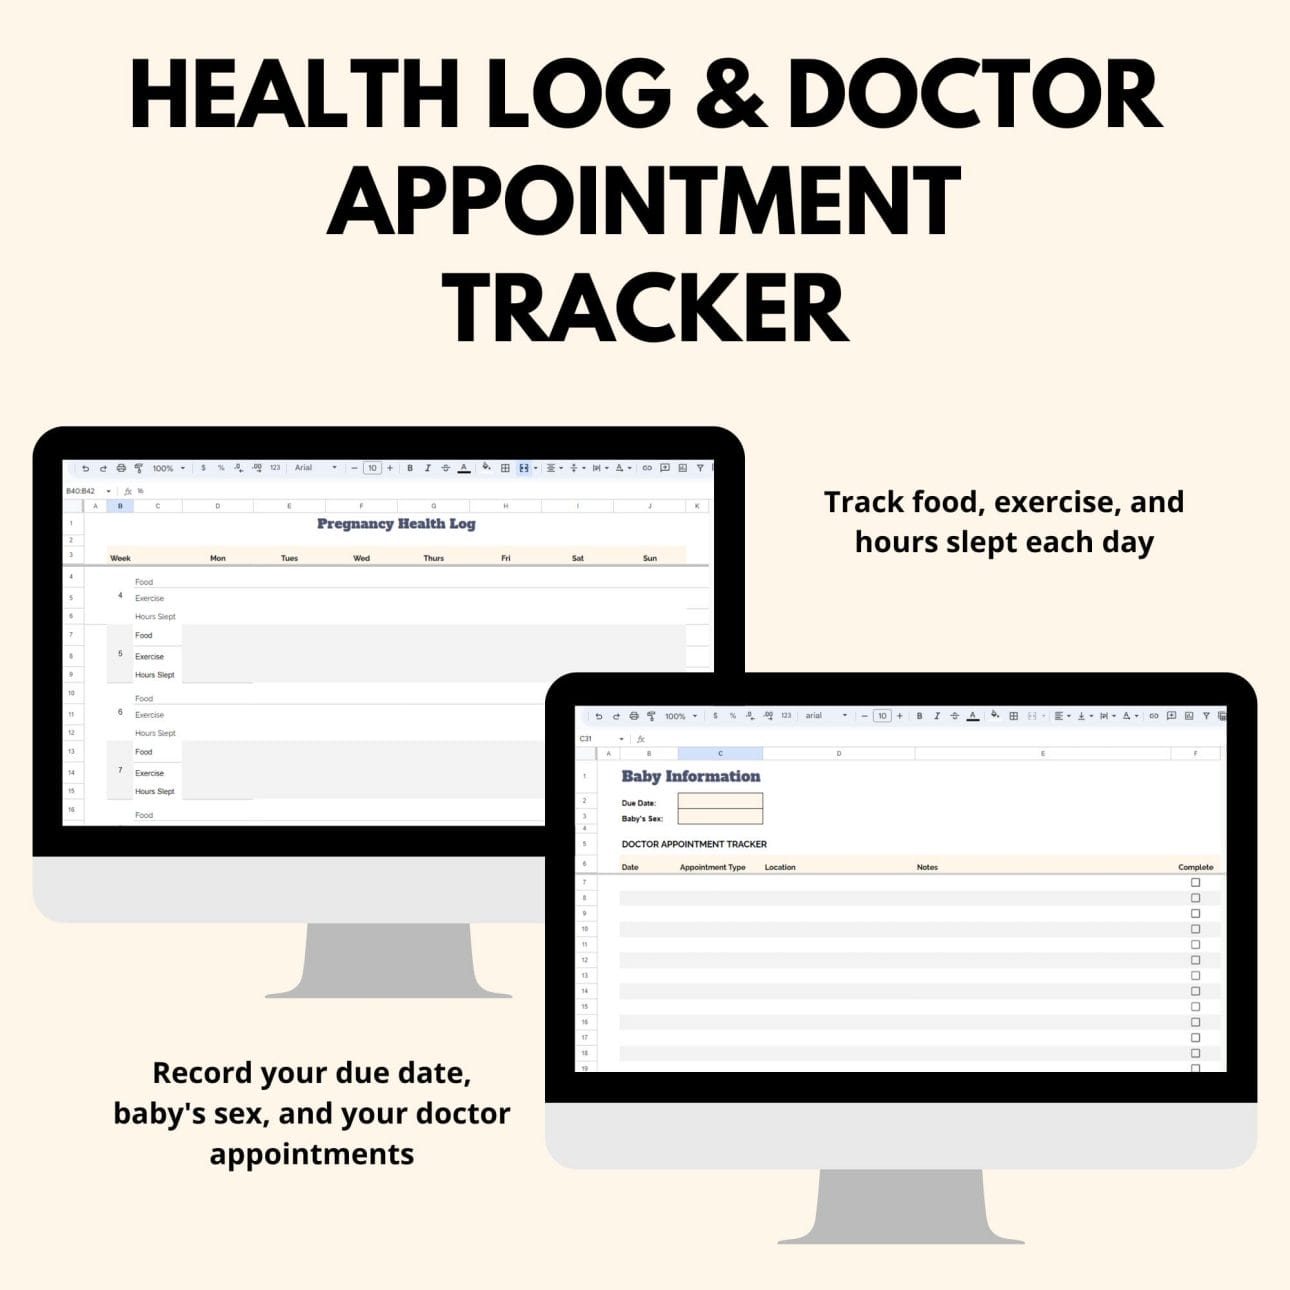 Health log and doctor appointment tracker.